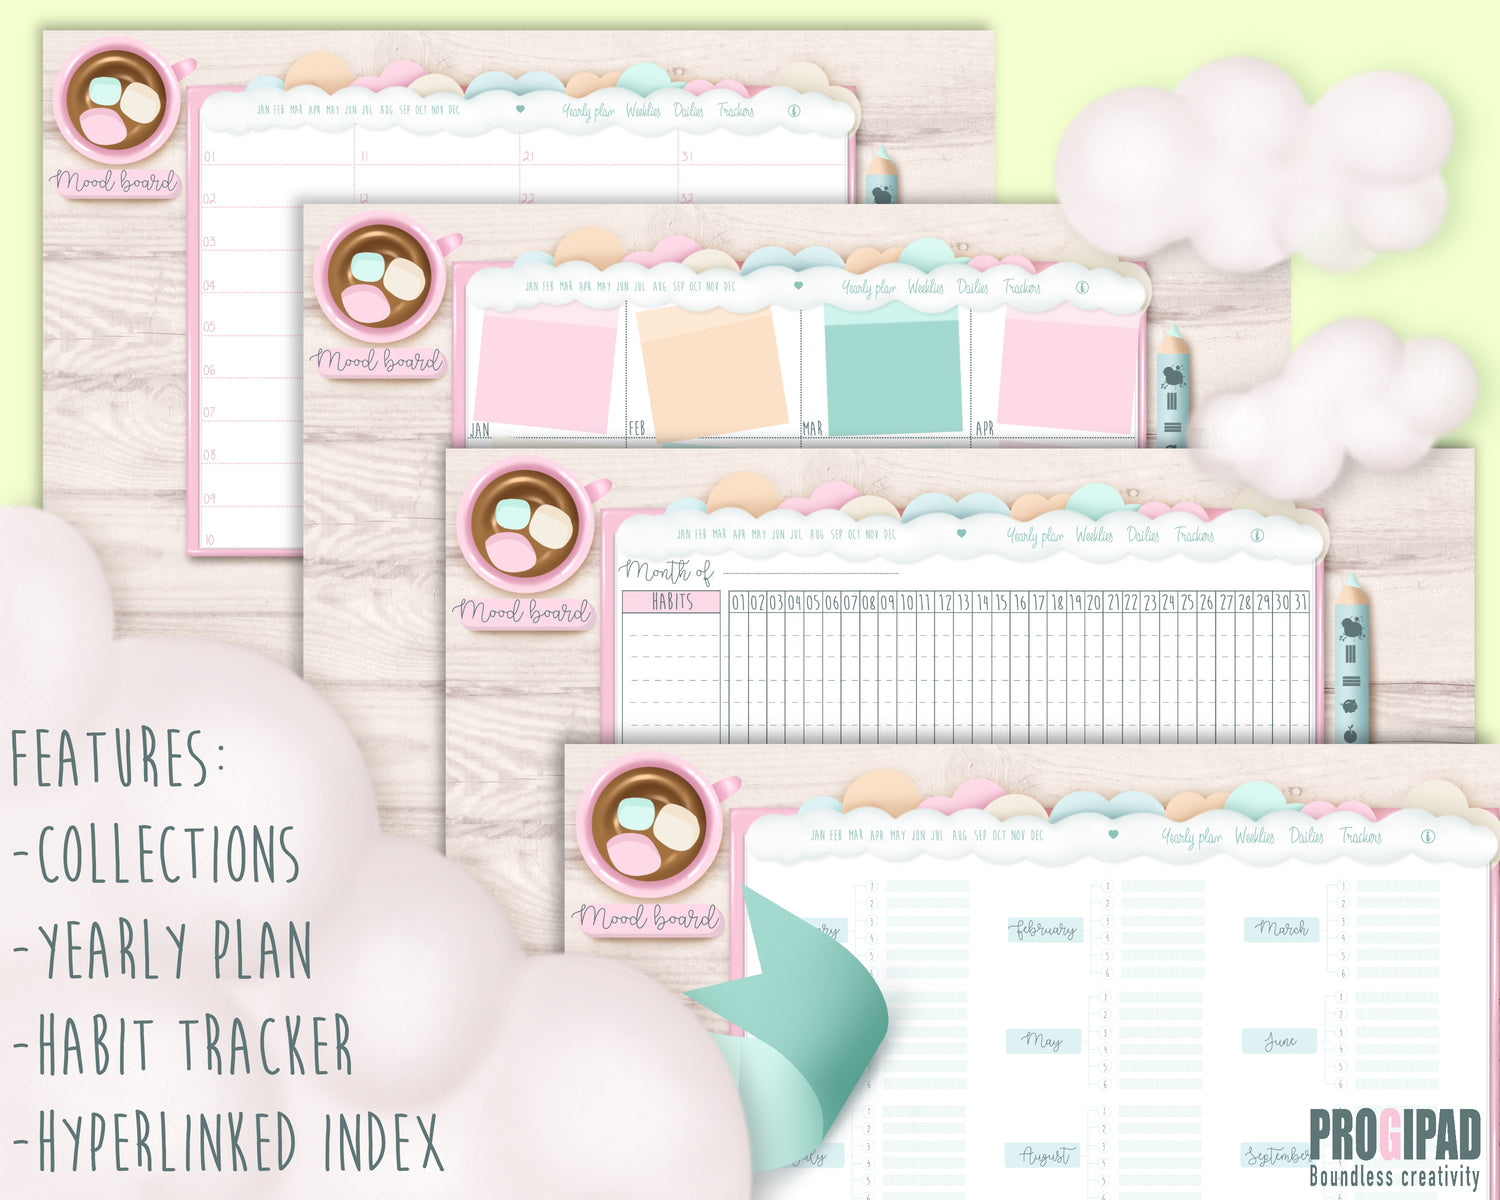 Mini Smart planner, 1 year, Undated and fully linked, Sunday start. Cloud collection.